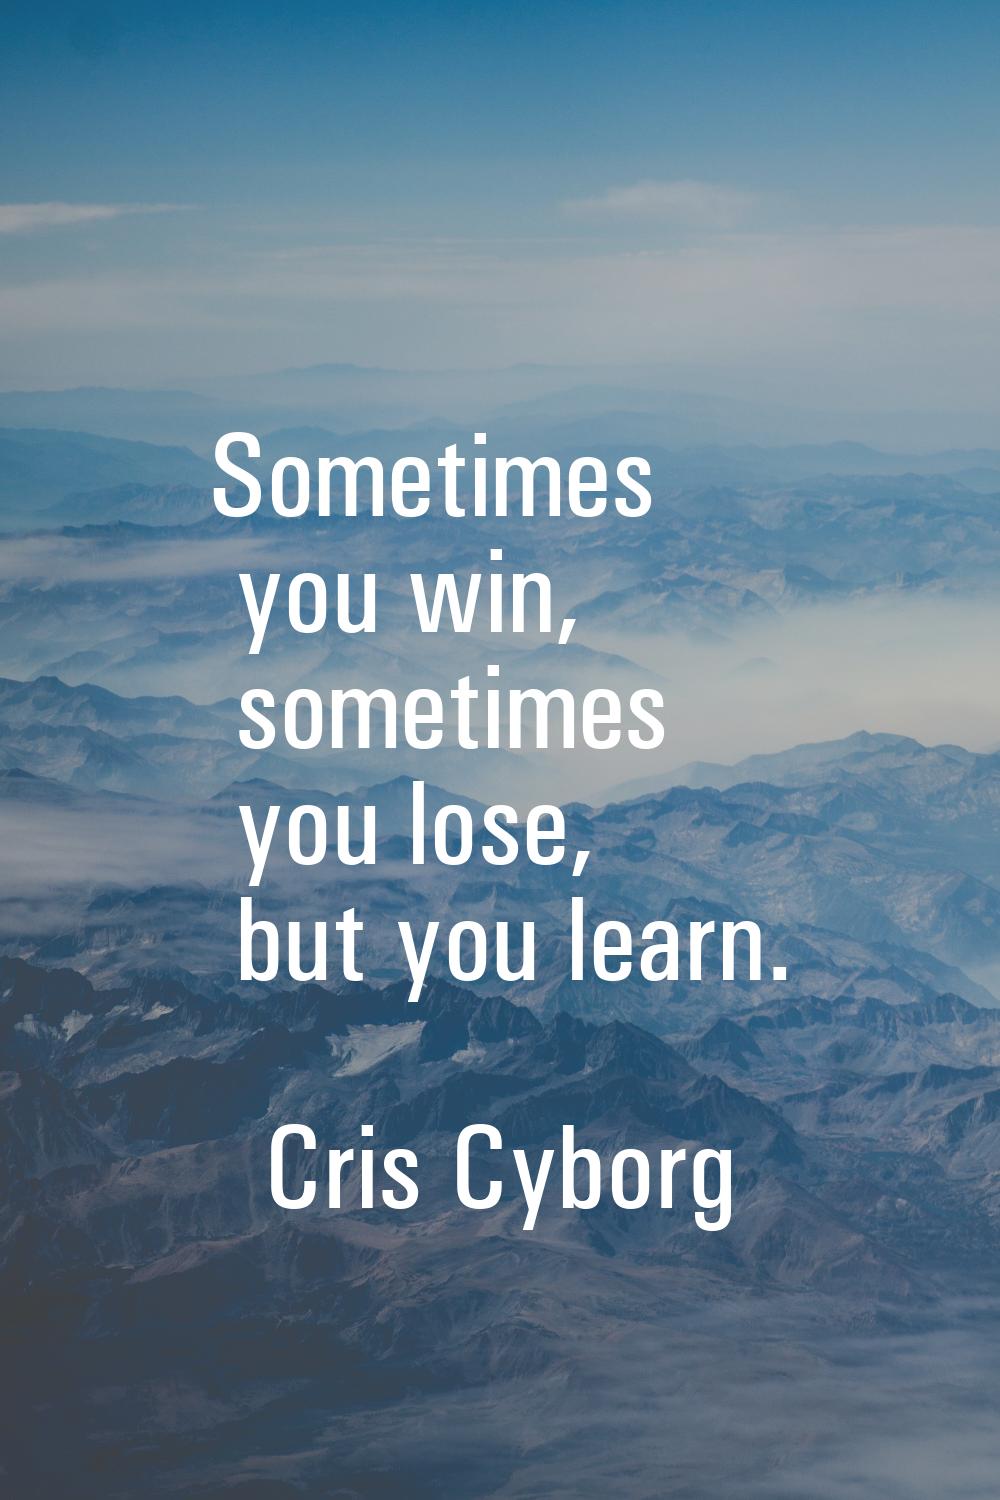 Sometimes you win, sometimes you lose, but you learn.